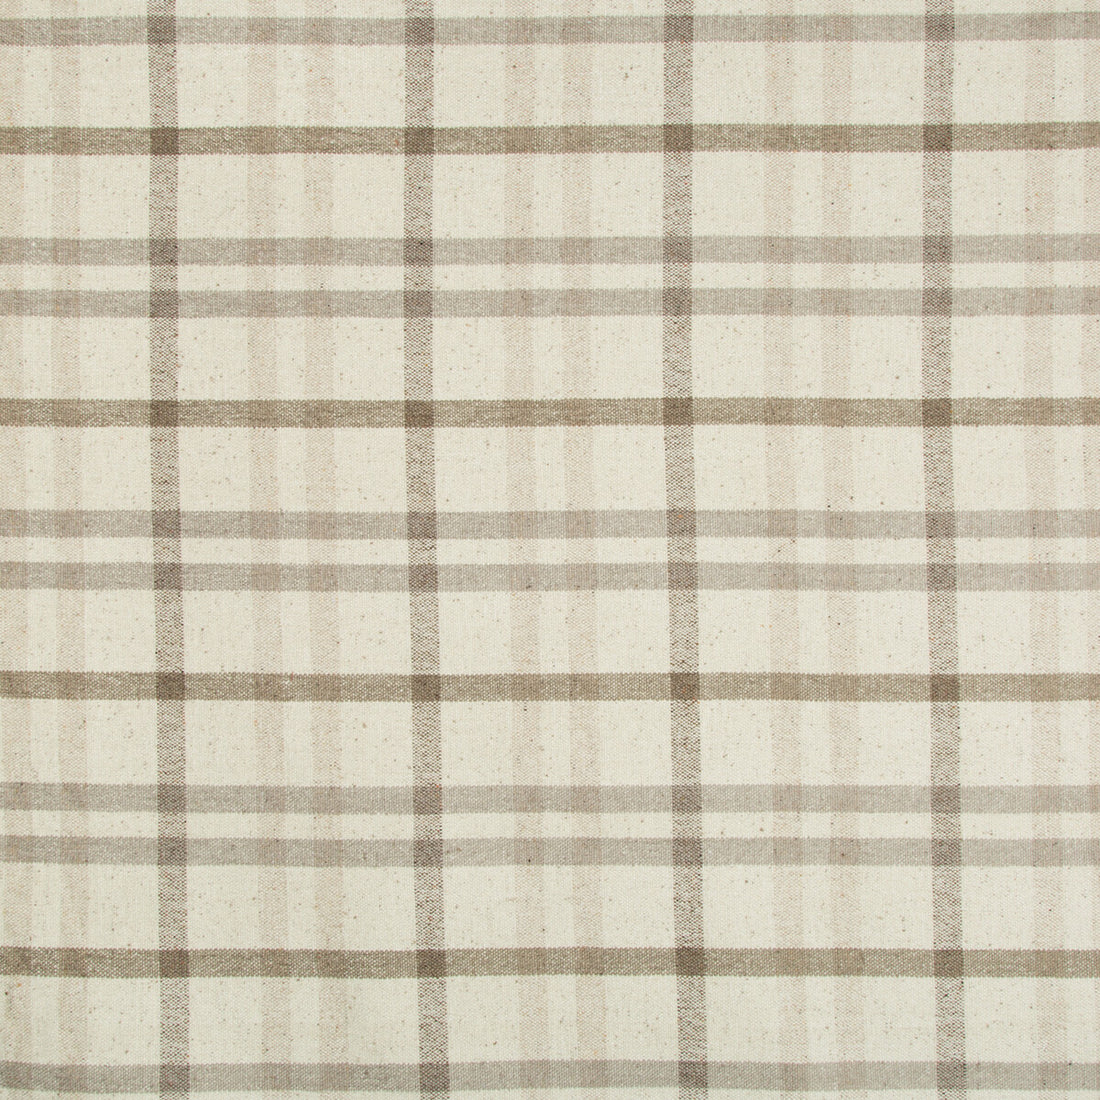 Fannin Plaid fabric in stone/mink color - pattern 2017125.116.0 - by Lee Jofa in the Lodge II Weaves And Embroideries collection